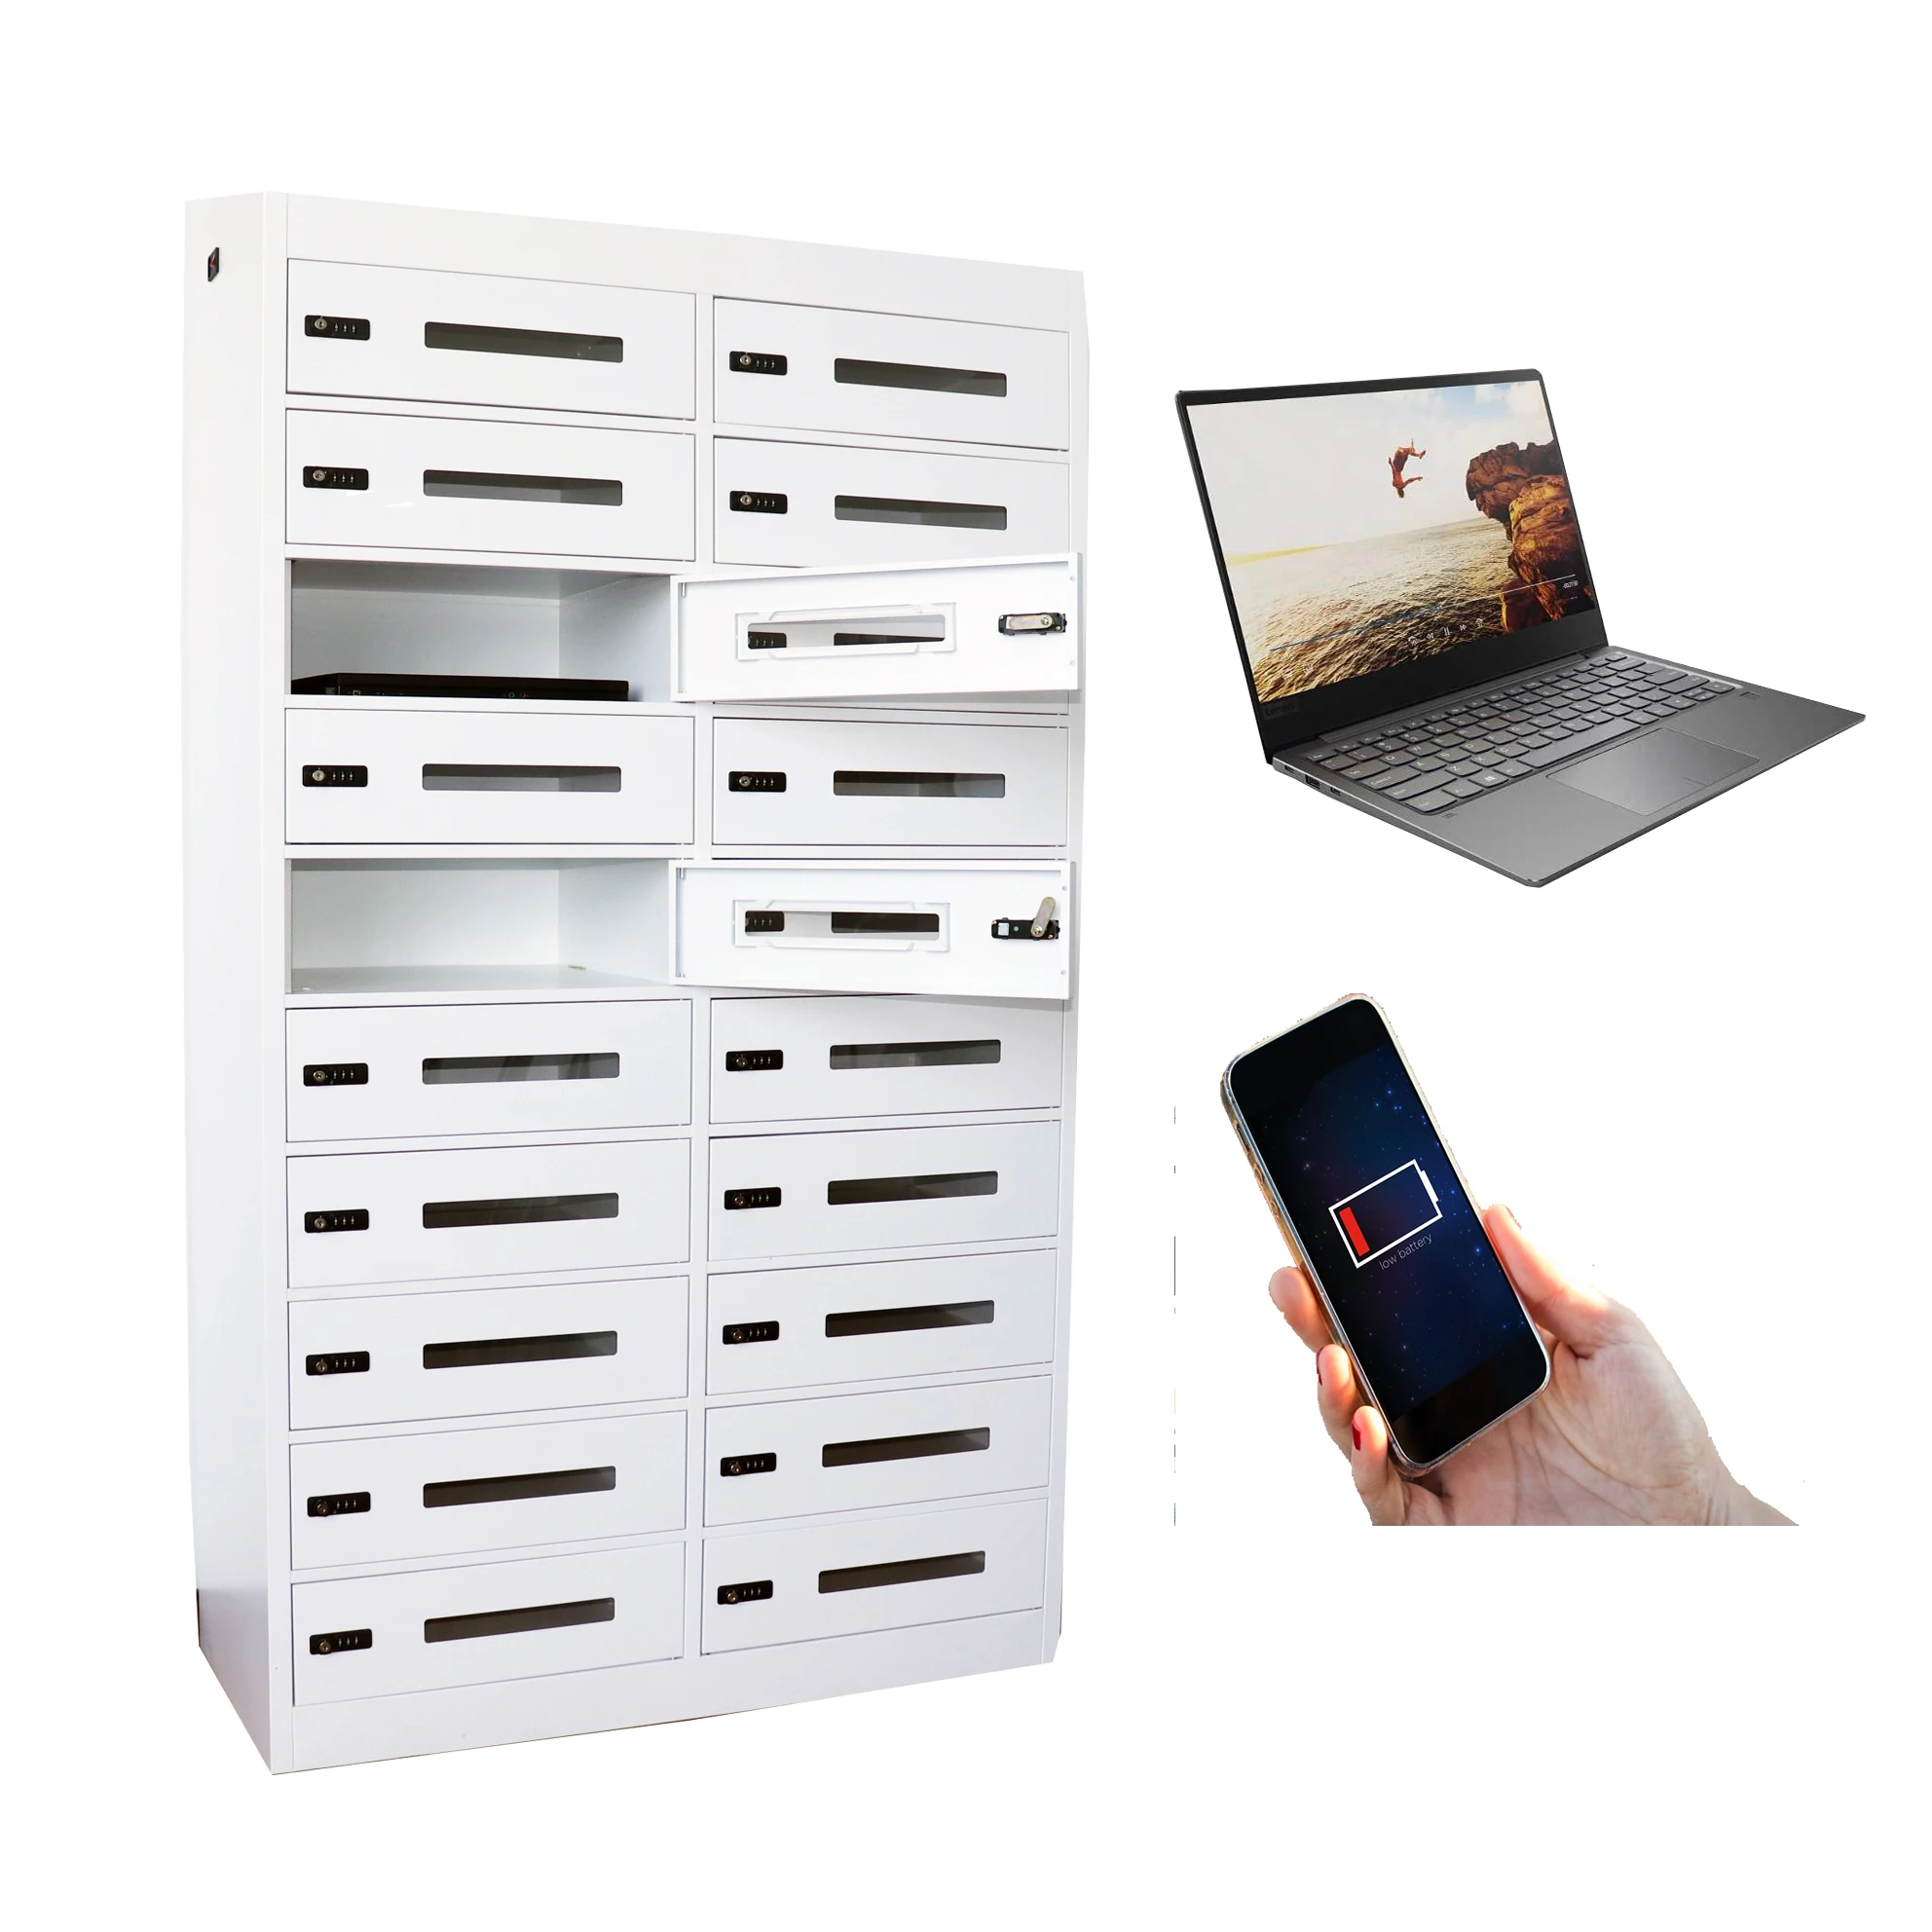 Indoor Floor-mounted Metal Charge Station Beach Laptop Phone Storage Locker With Charging Cabinet With Custom Made Power Socket